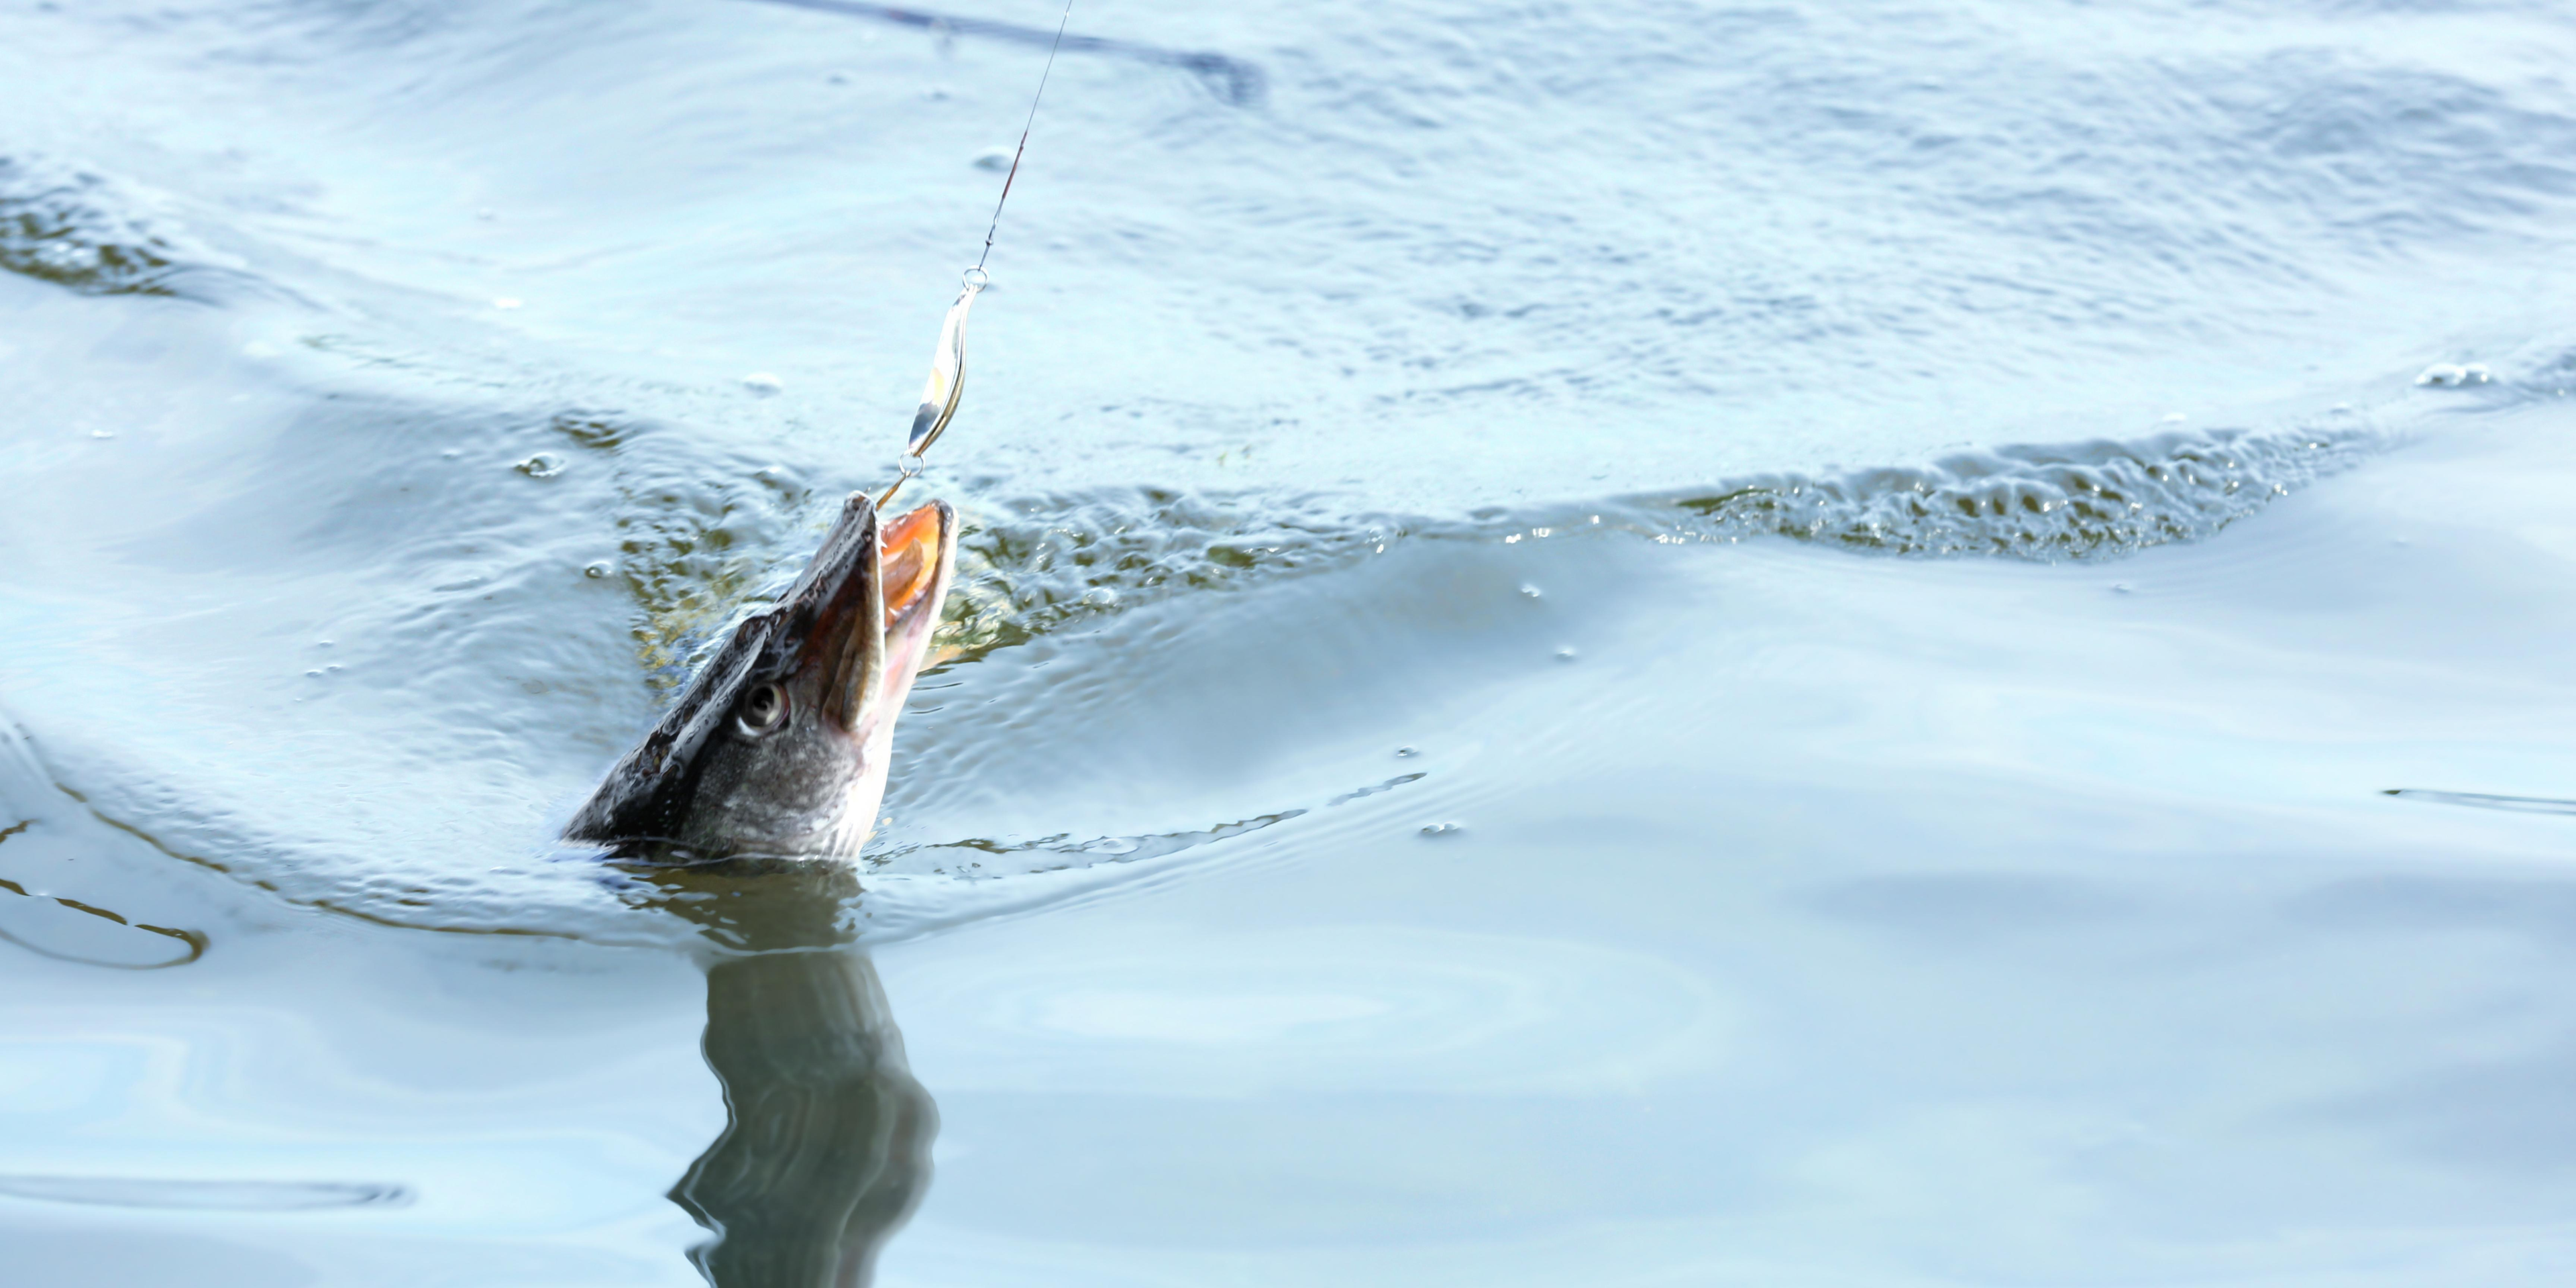 Are Braided Fishing Lines Really The Best?